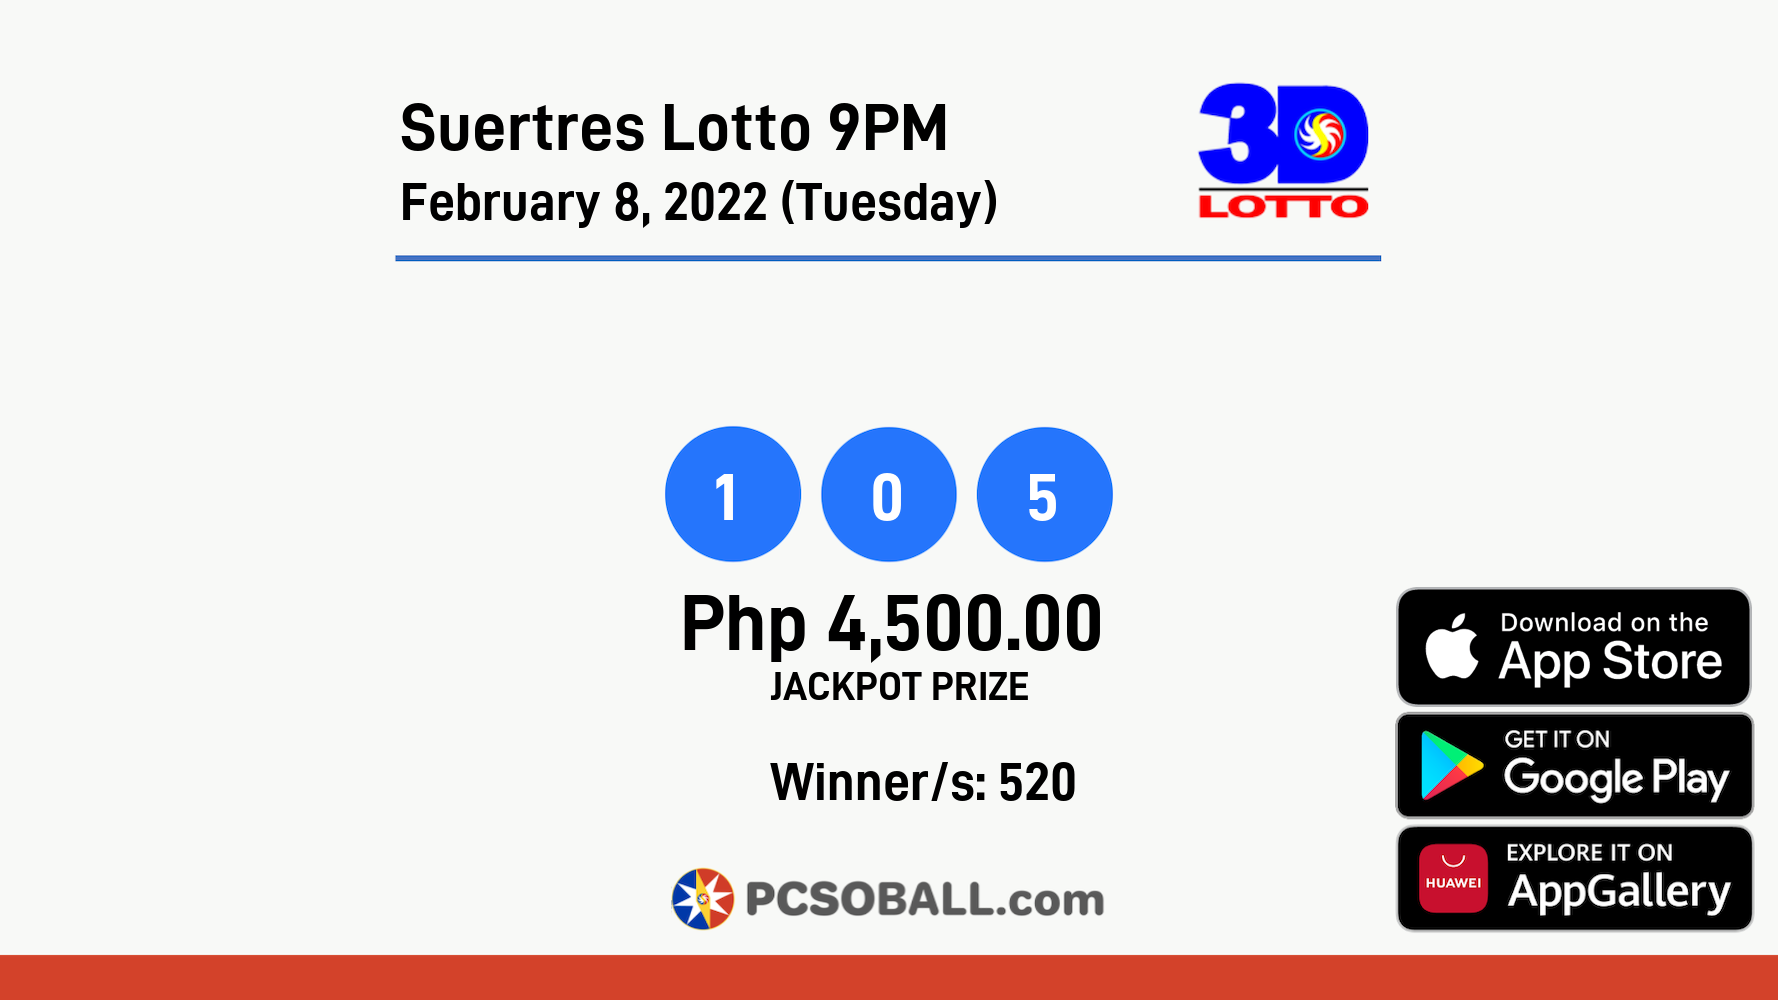 Suertres Lotto 9PM February 8, 2022 (Tuesday) Result